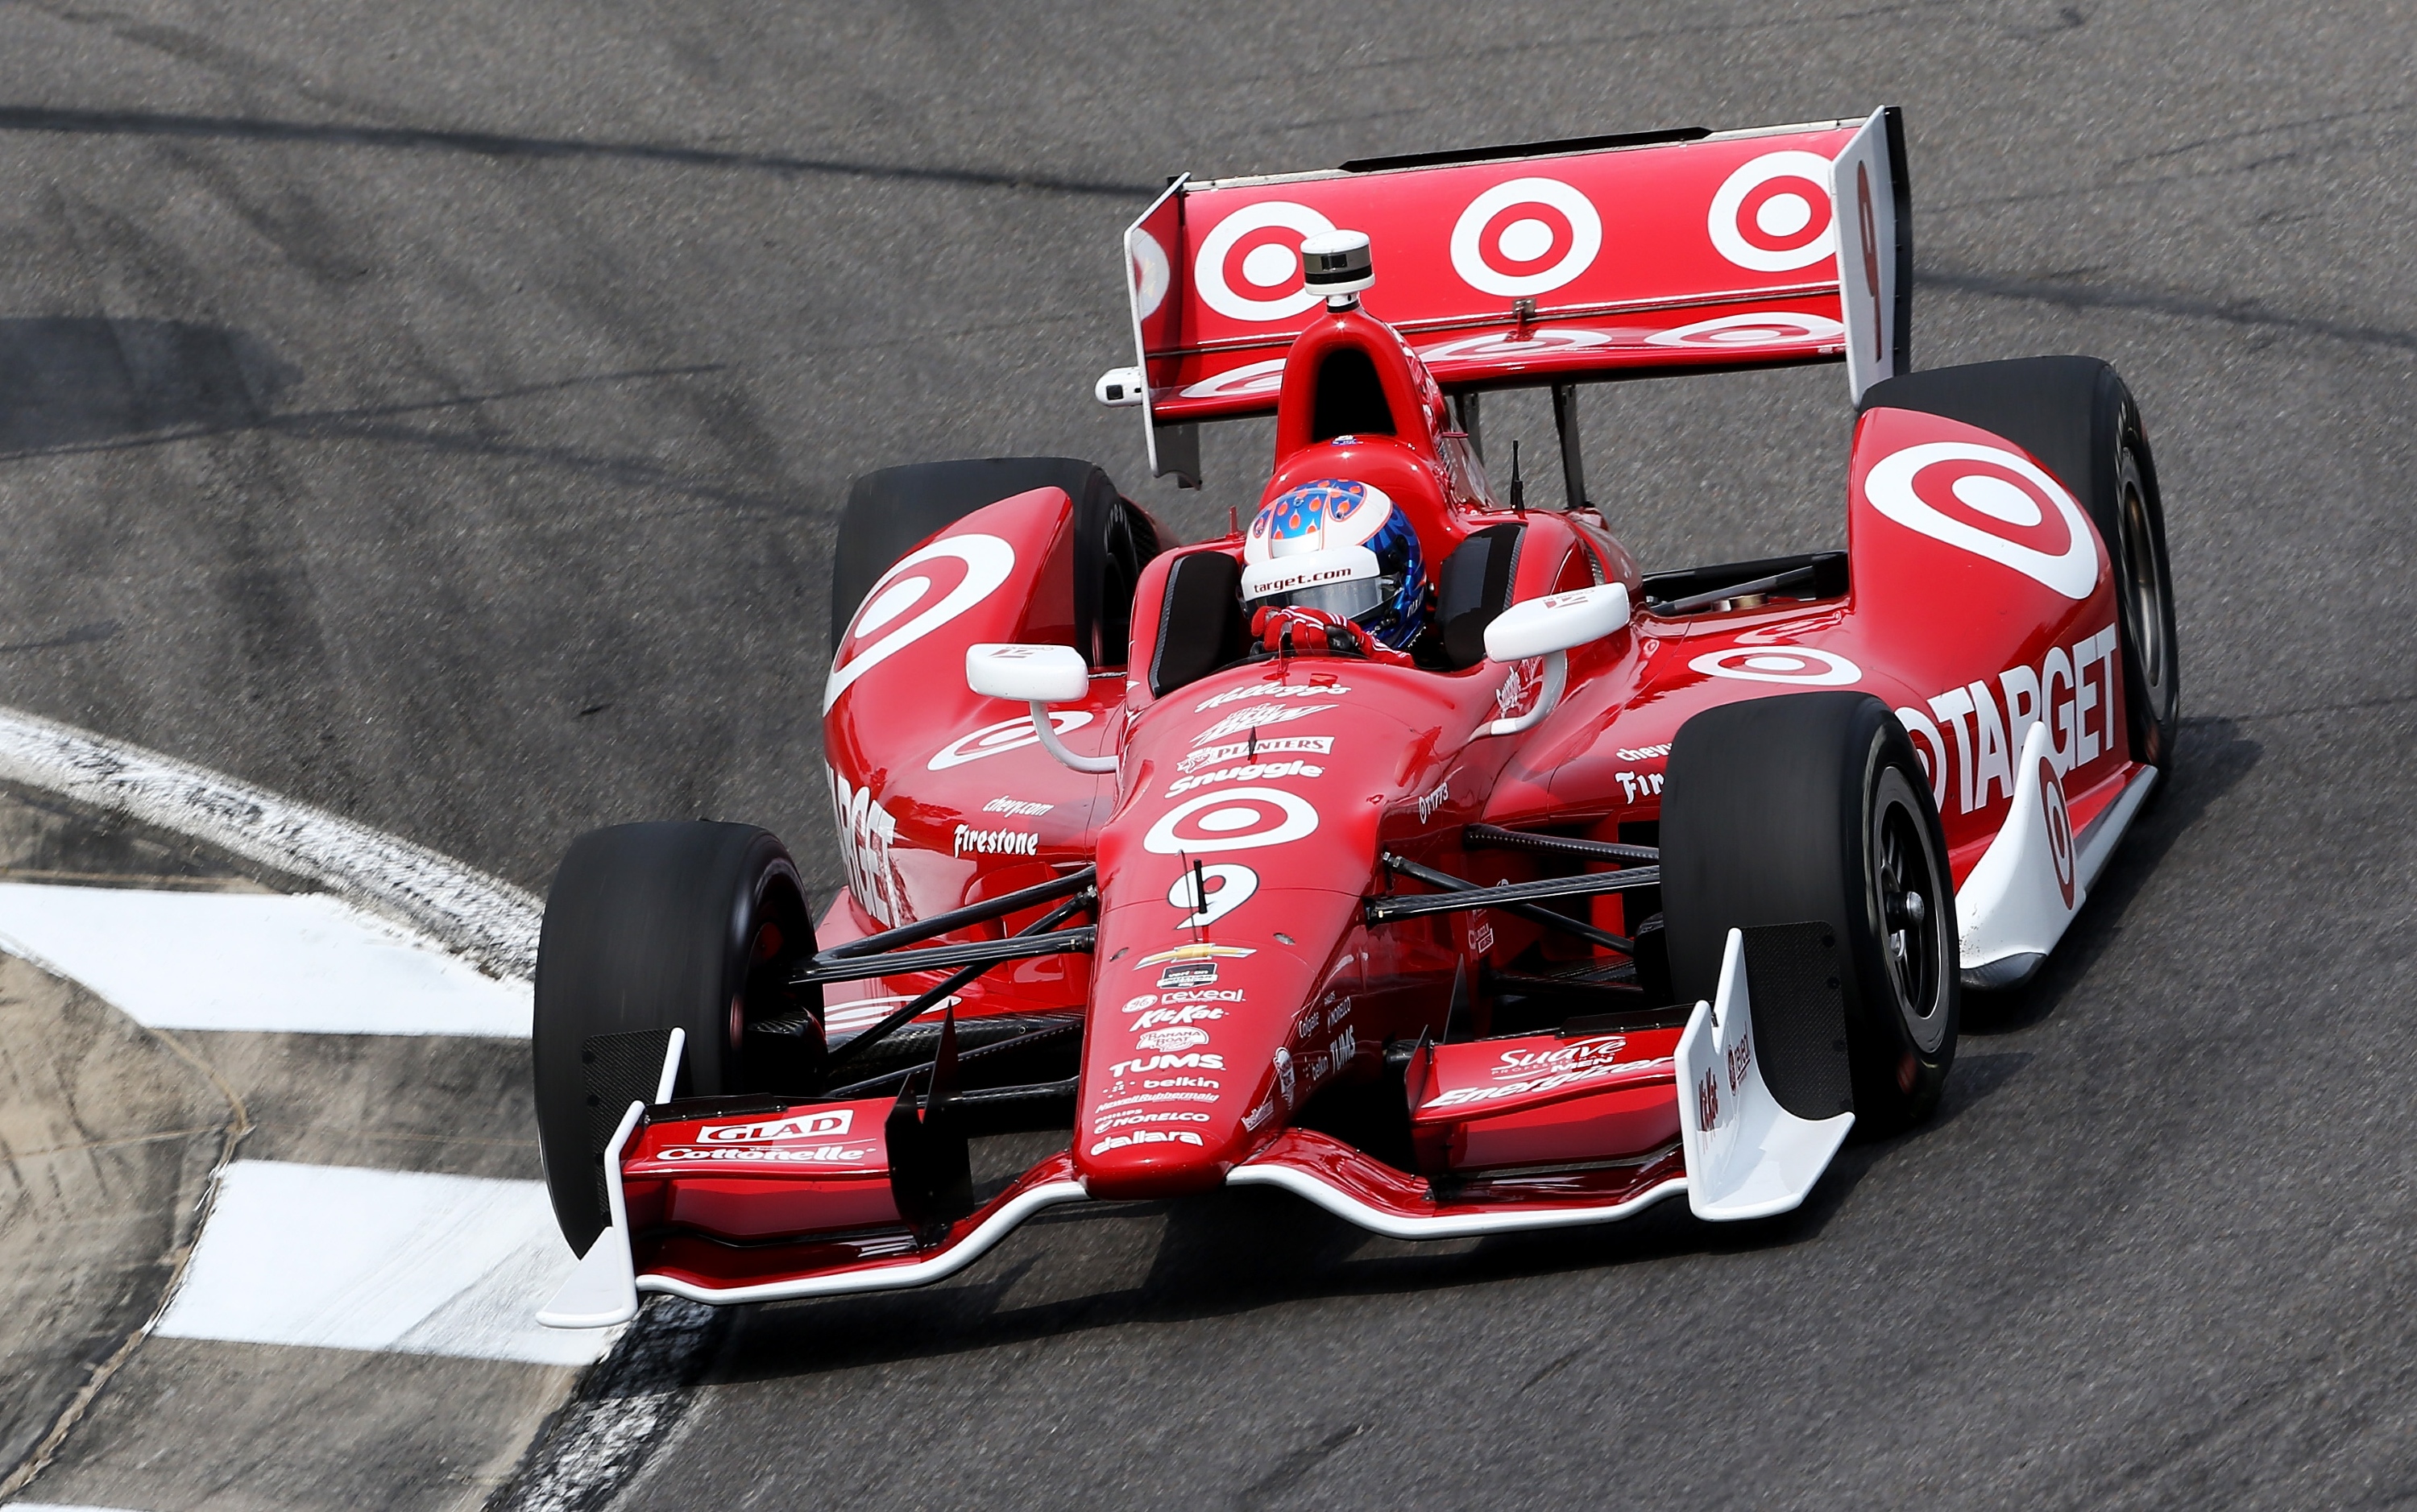 Podium for Dixon in storm-delayed Barber Indy race